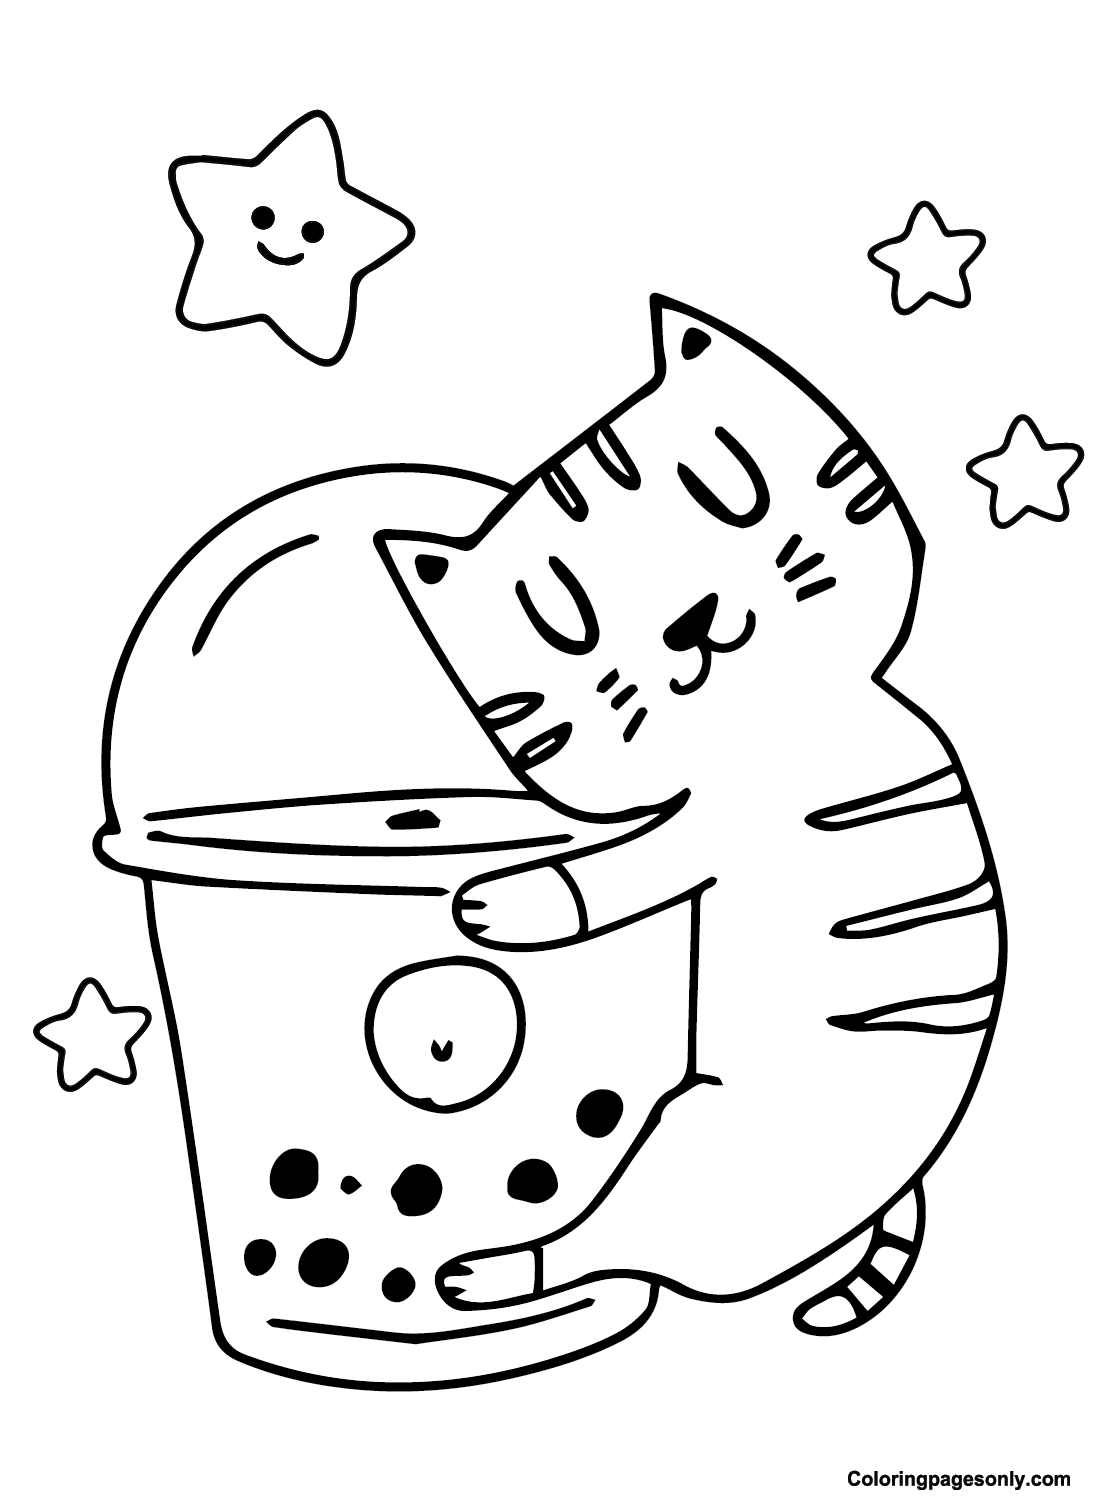 Cat holding Boba Tea Coloring Page